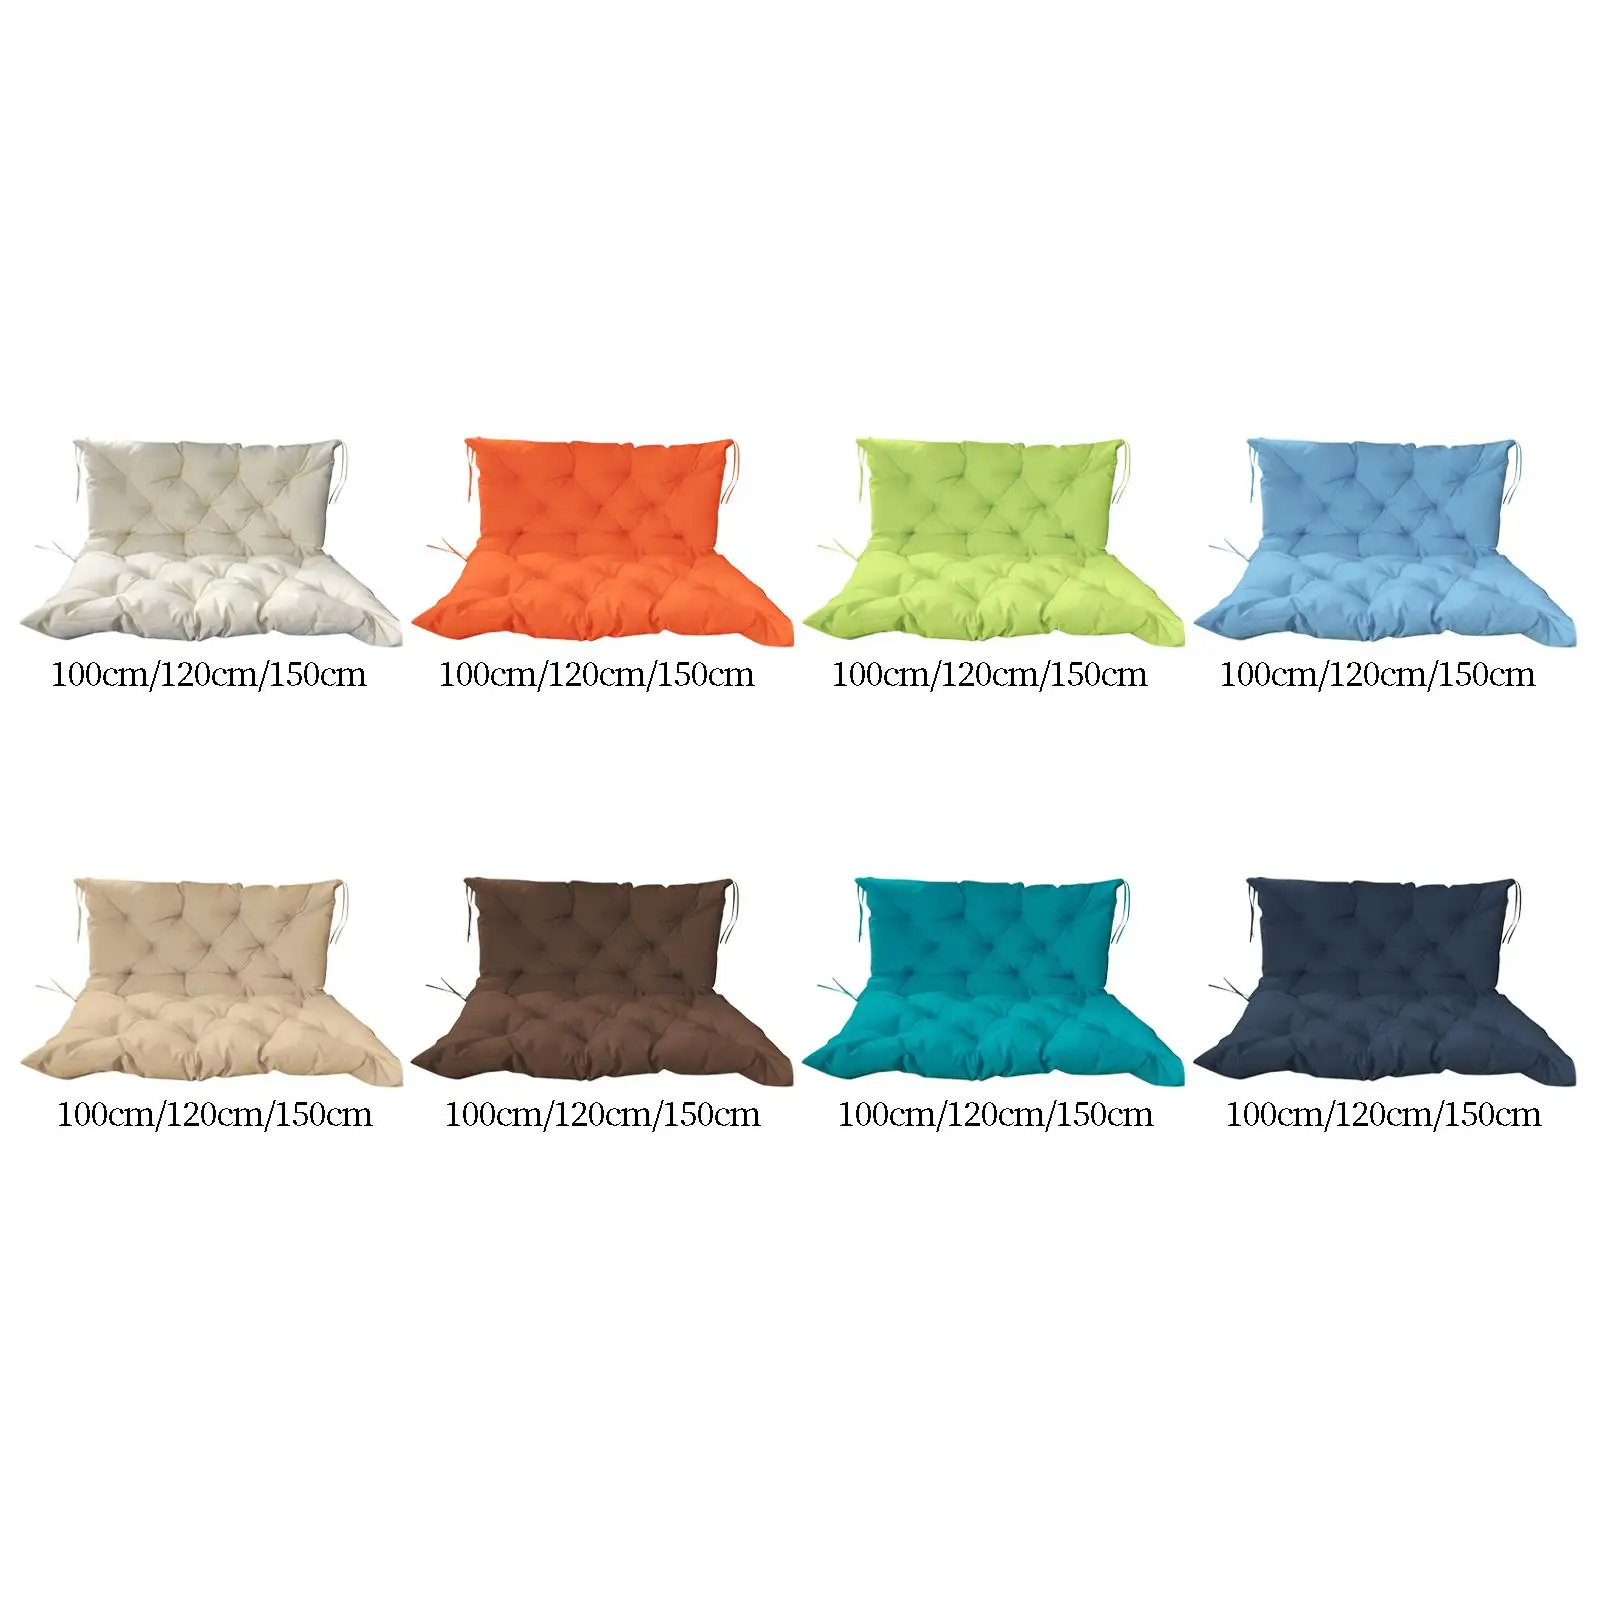 Swing Cushion Washable Bench Cushion Chair Back Cushions Pad Porch Swing Chair Cushion for Garden Porch Lawn Lounger Bench